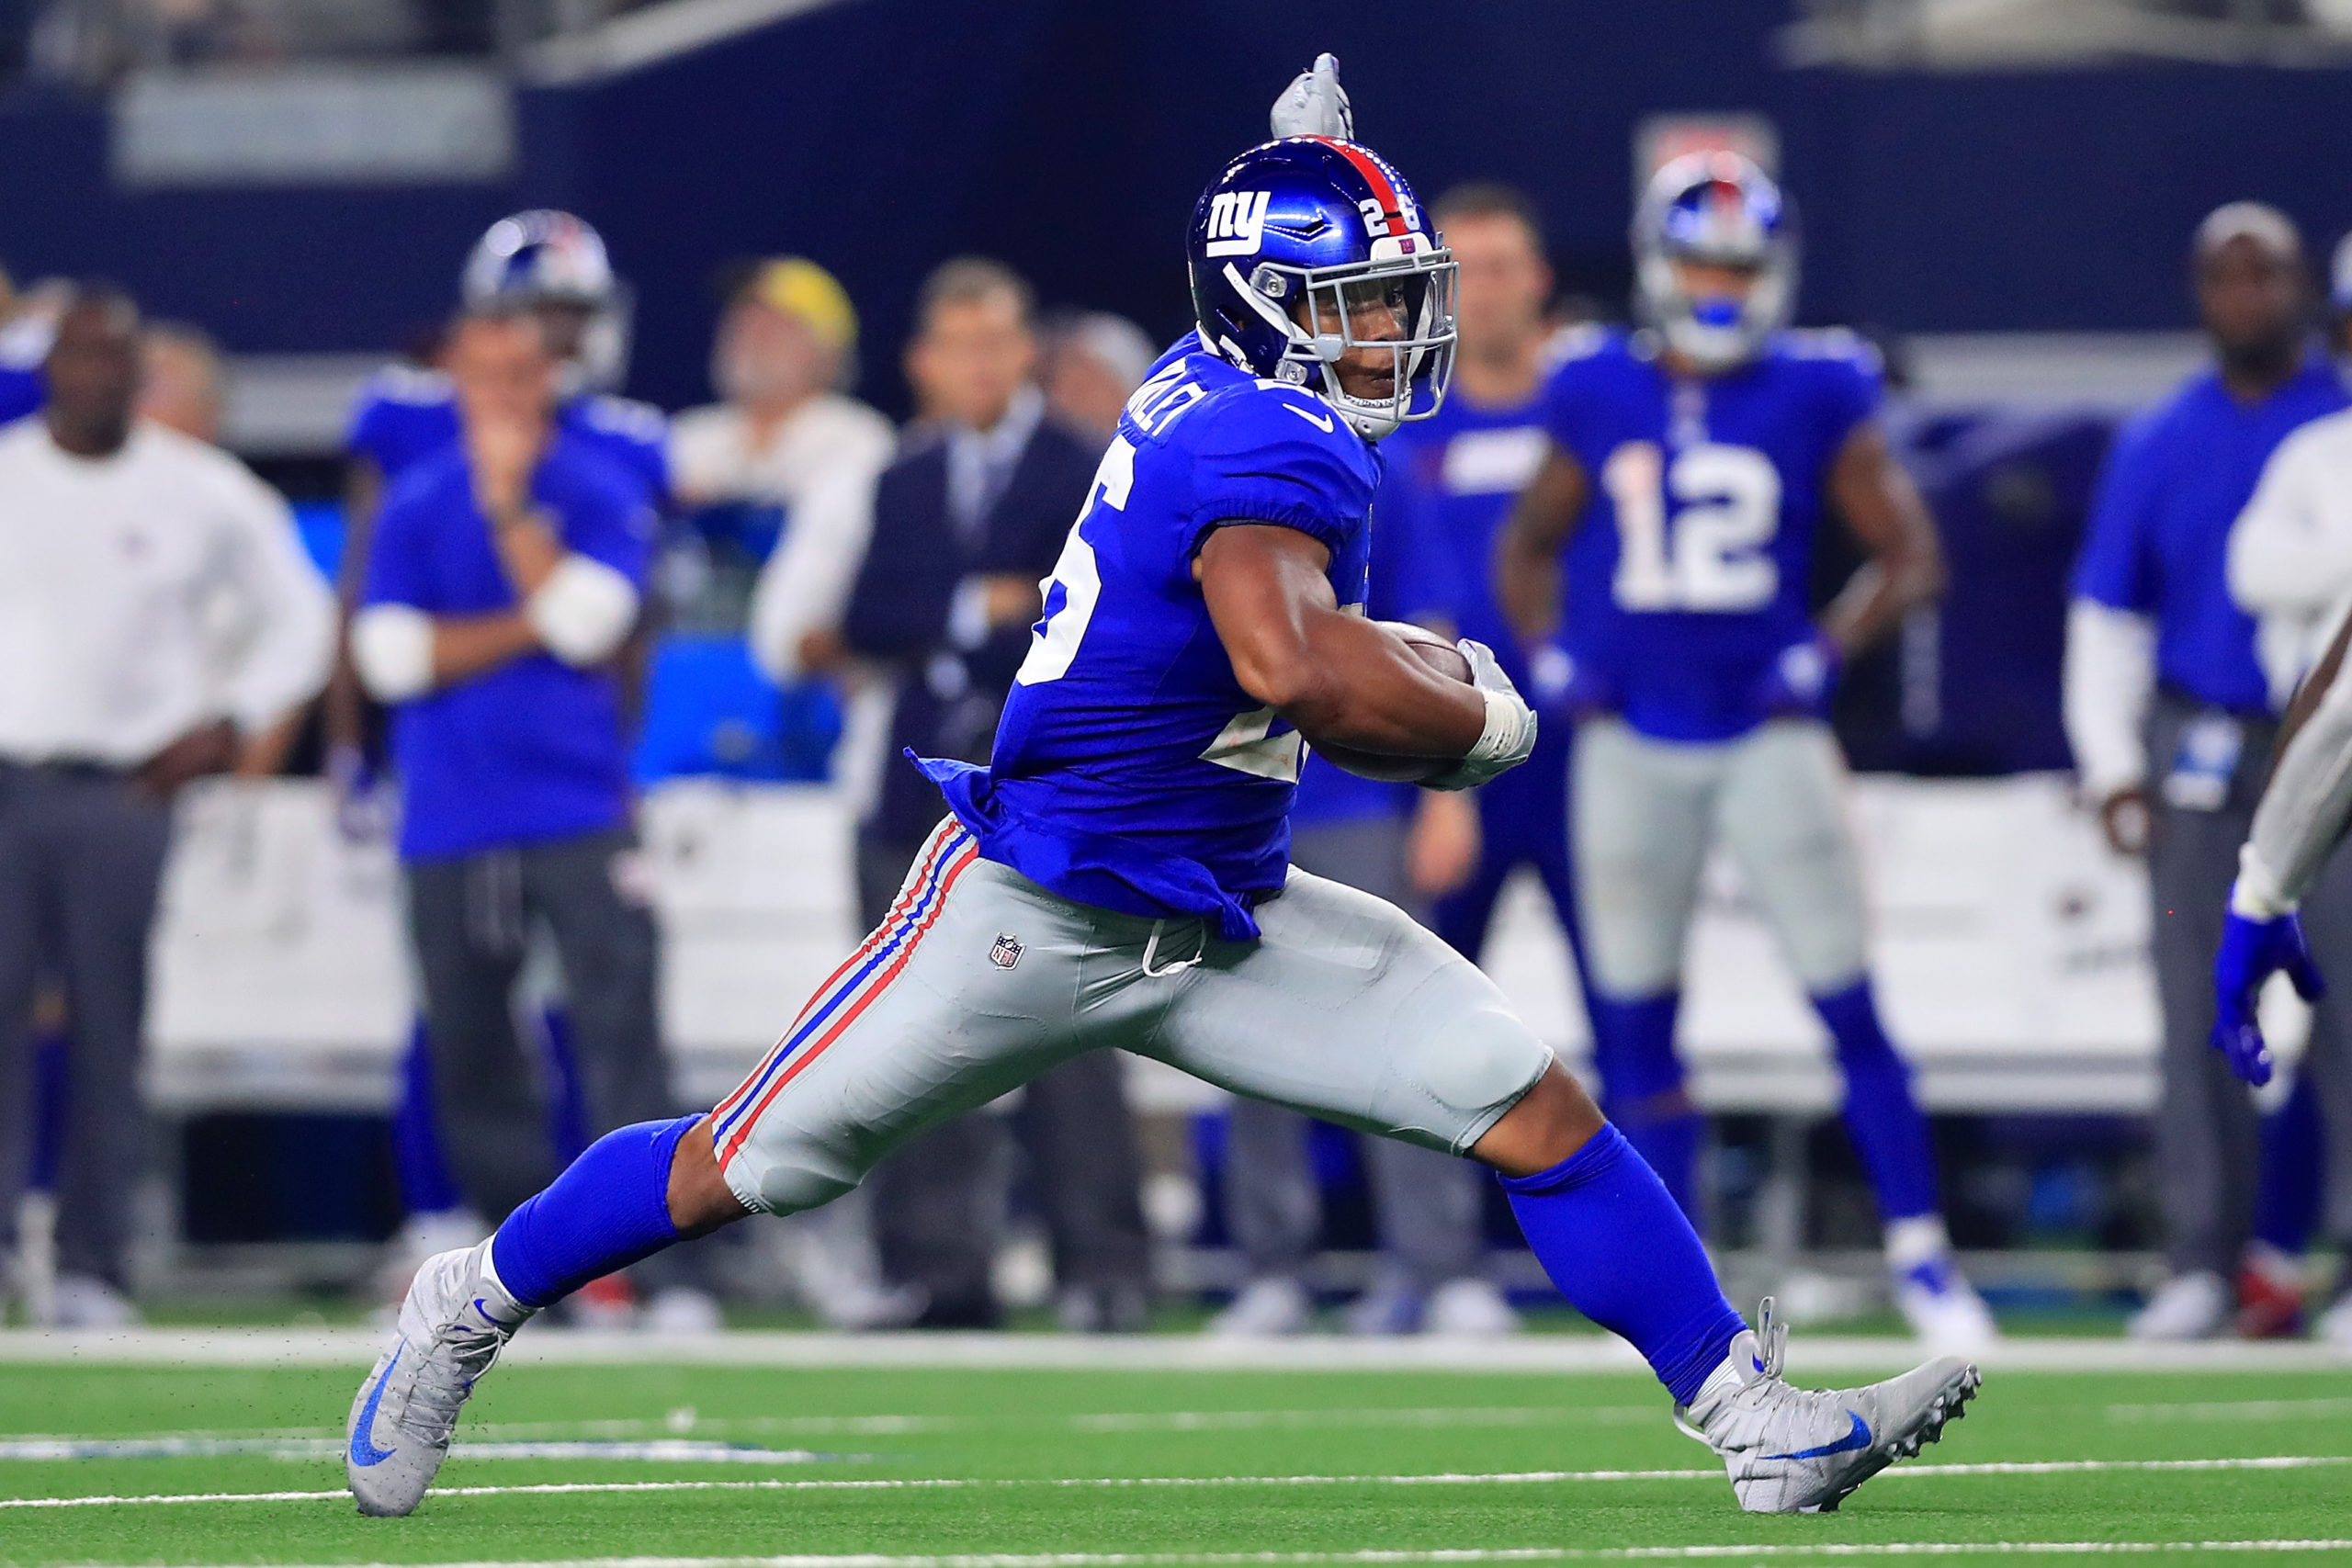 ARLINGTON, TX - SEPTEMBER 16: Saquon Barkley #26 of the New York Giants carries the ball against the Dallas Cowboys in the fourth quarter at AT&T Stadium on September 16, 2018 in Arlington, Texas. Tom Pennington/Getty Images